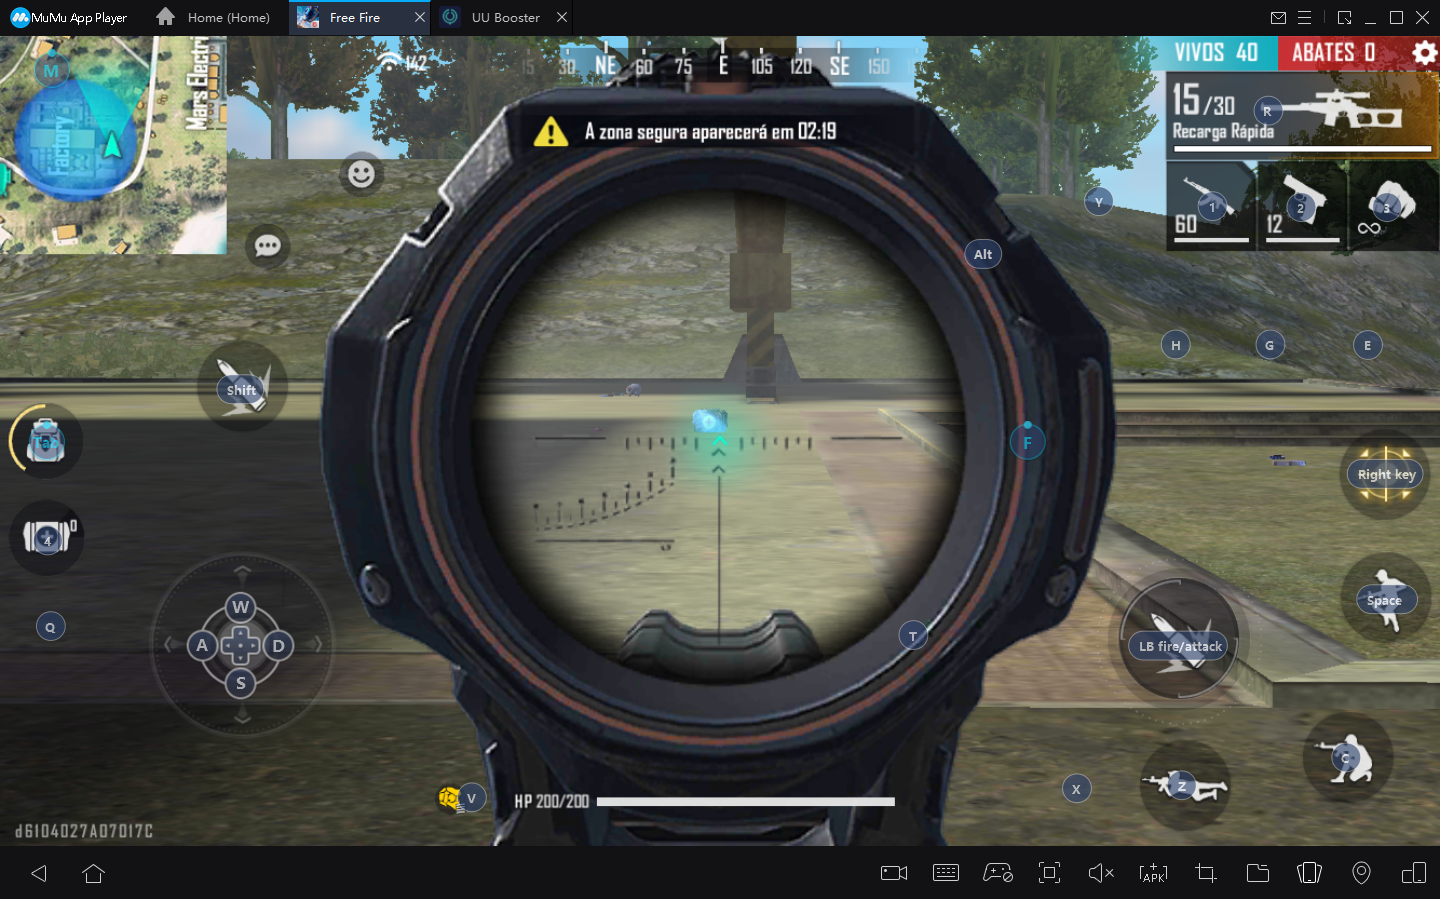 How to play Free Fire on PC with MuMu Player